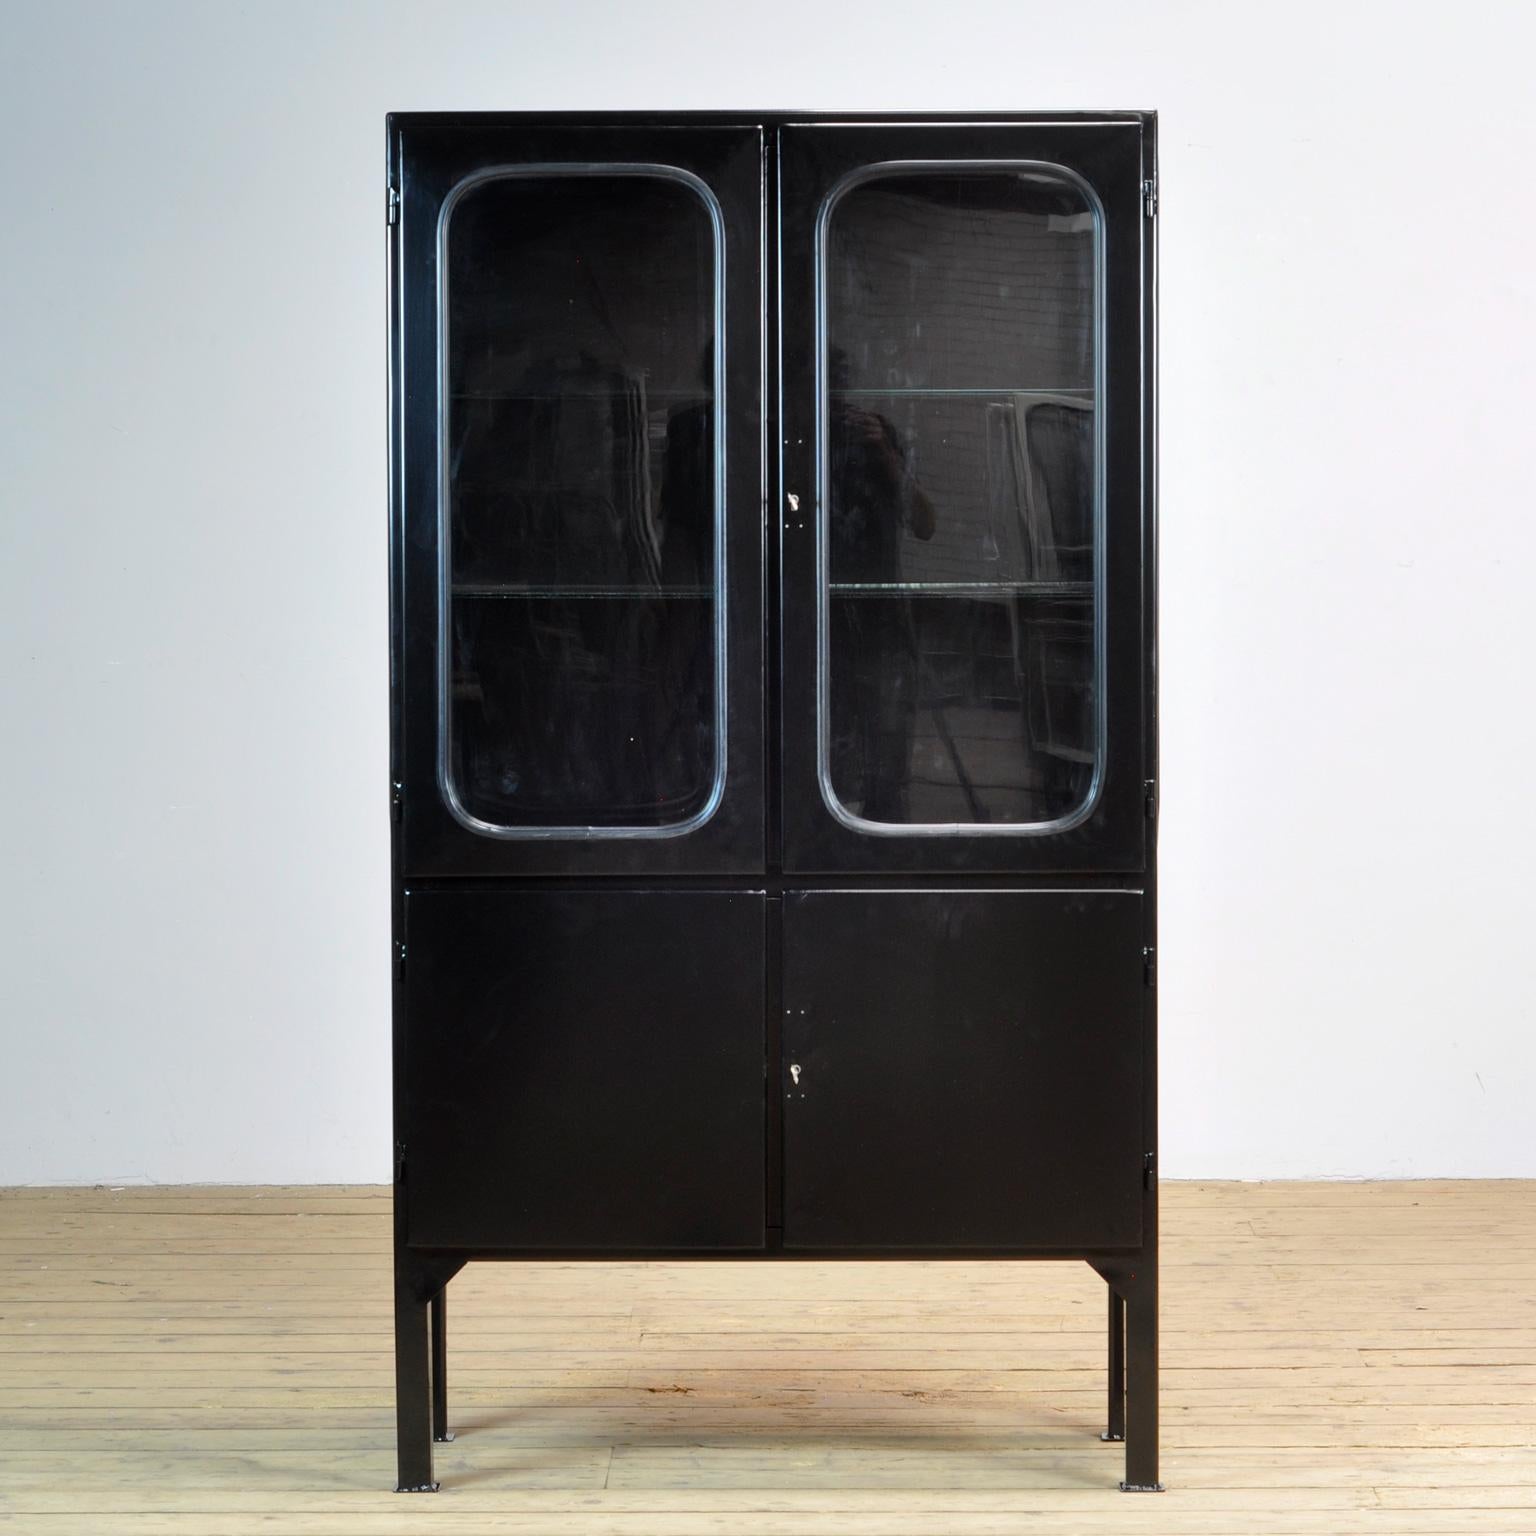 This medicine cabinet was designed in the 1970s and was produced circa 1975 in hungary. It has been sandblasted and powder coated in black. It is made from iron and glass. The glass is held by (new) black rubber stripa. The cabinet features two